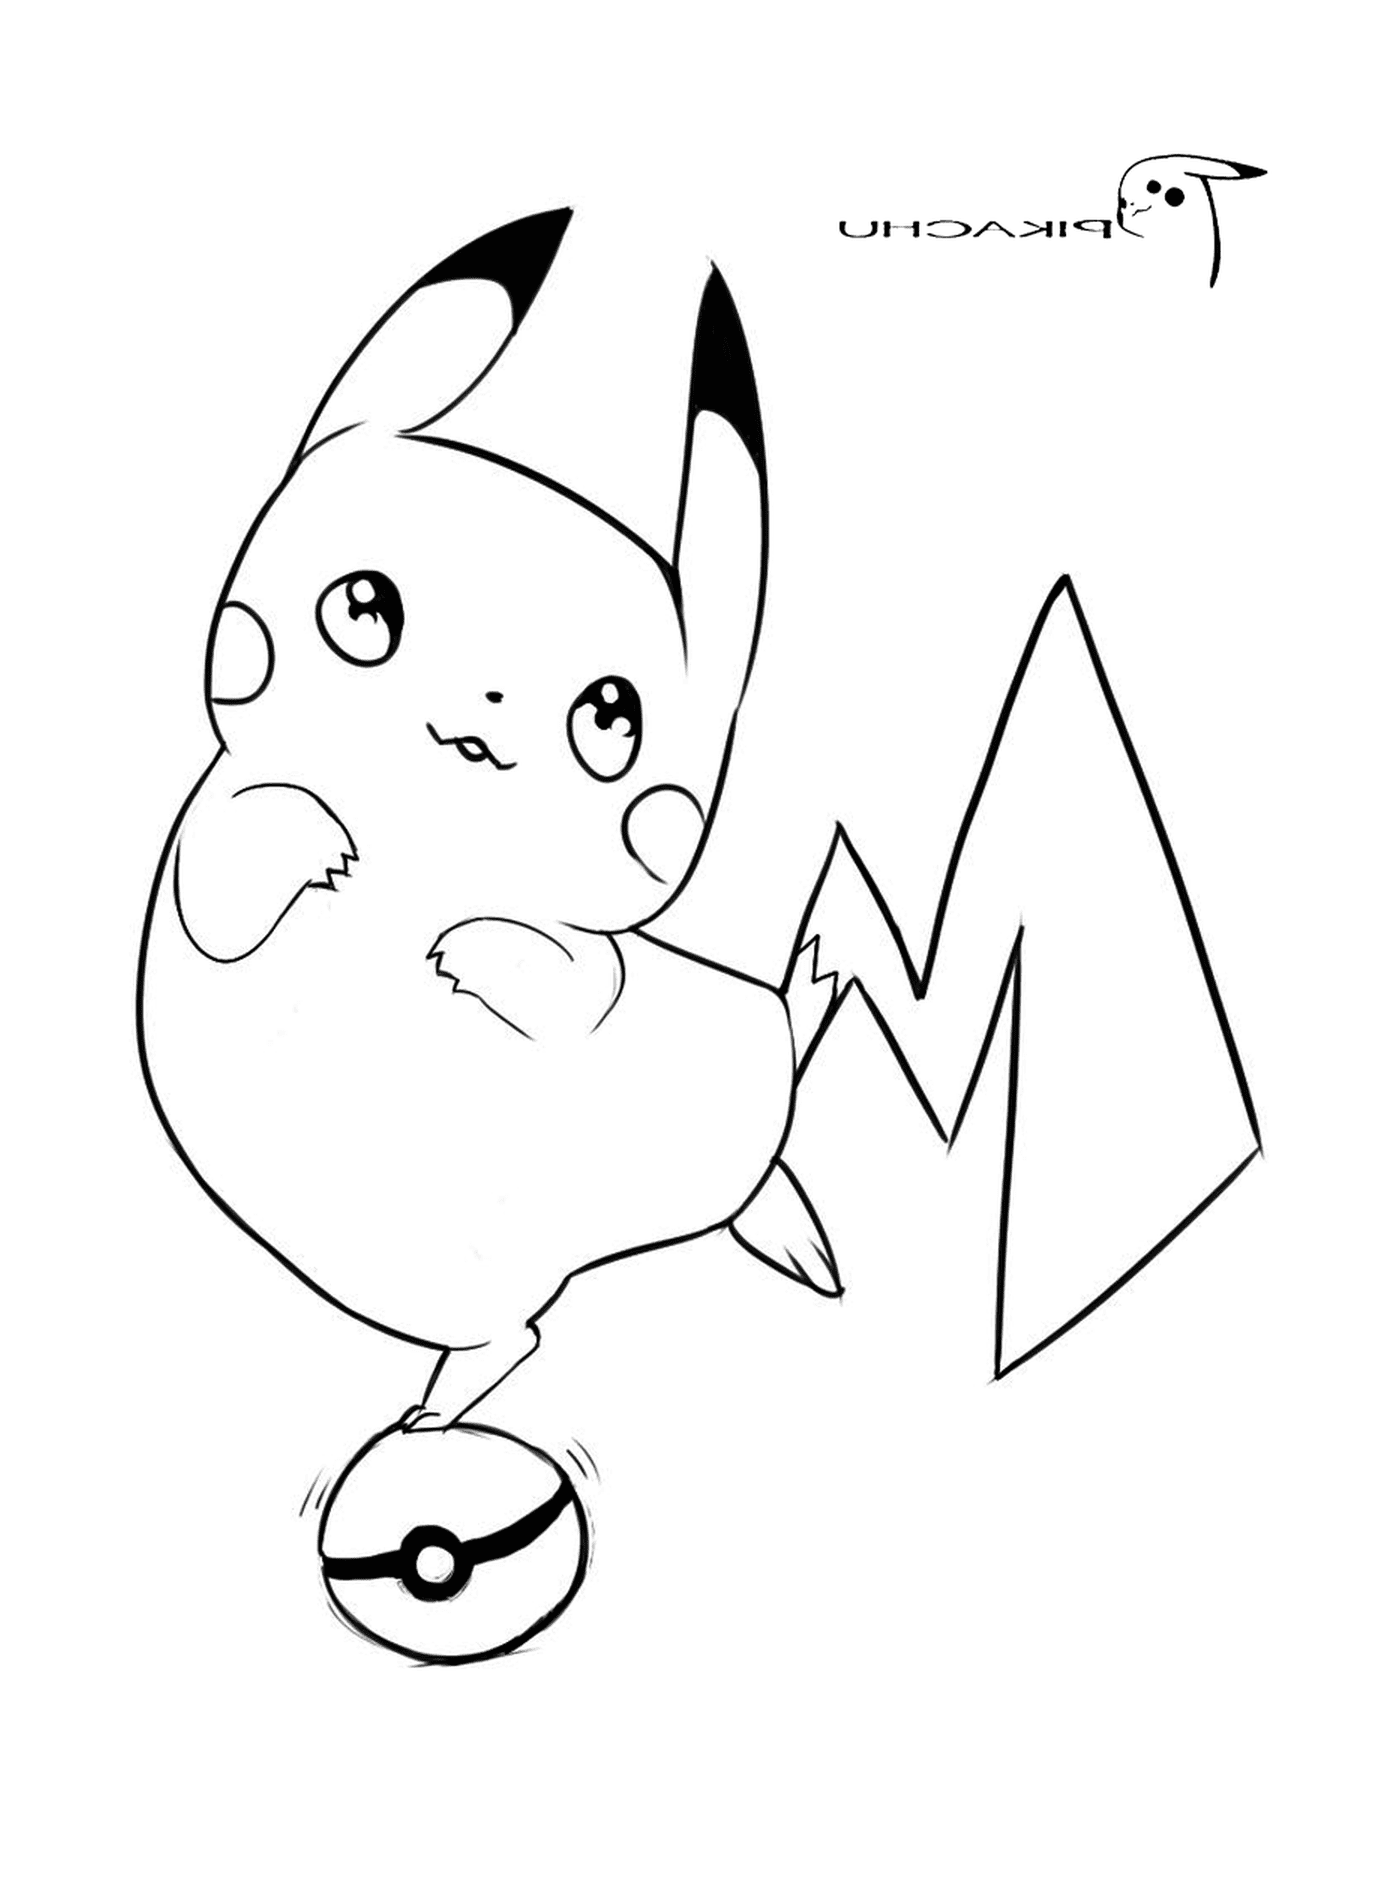  Pikachu with a proud expression 